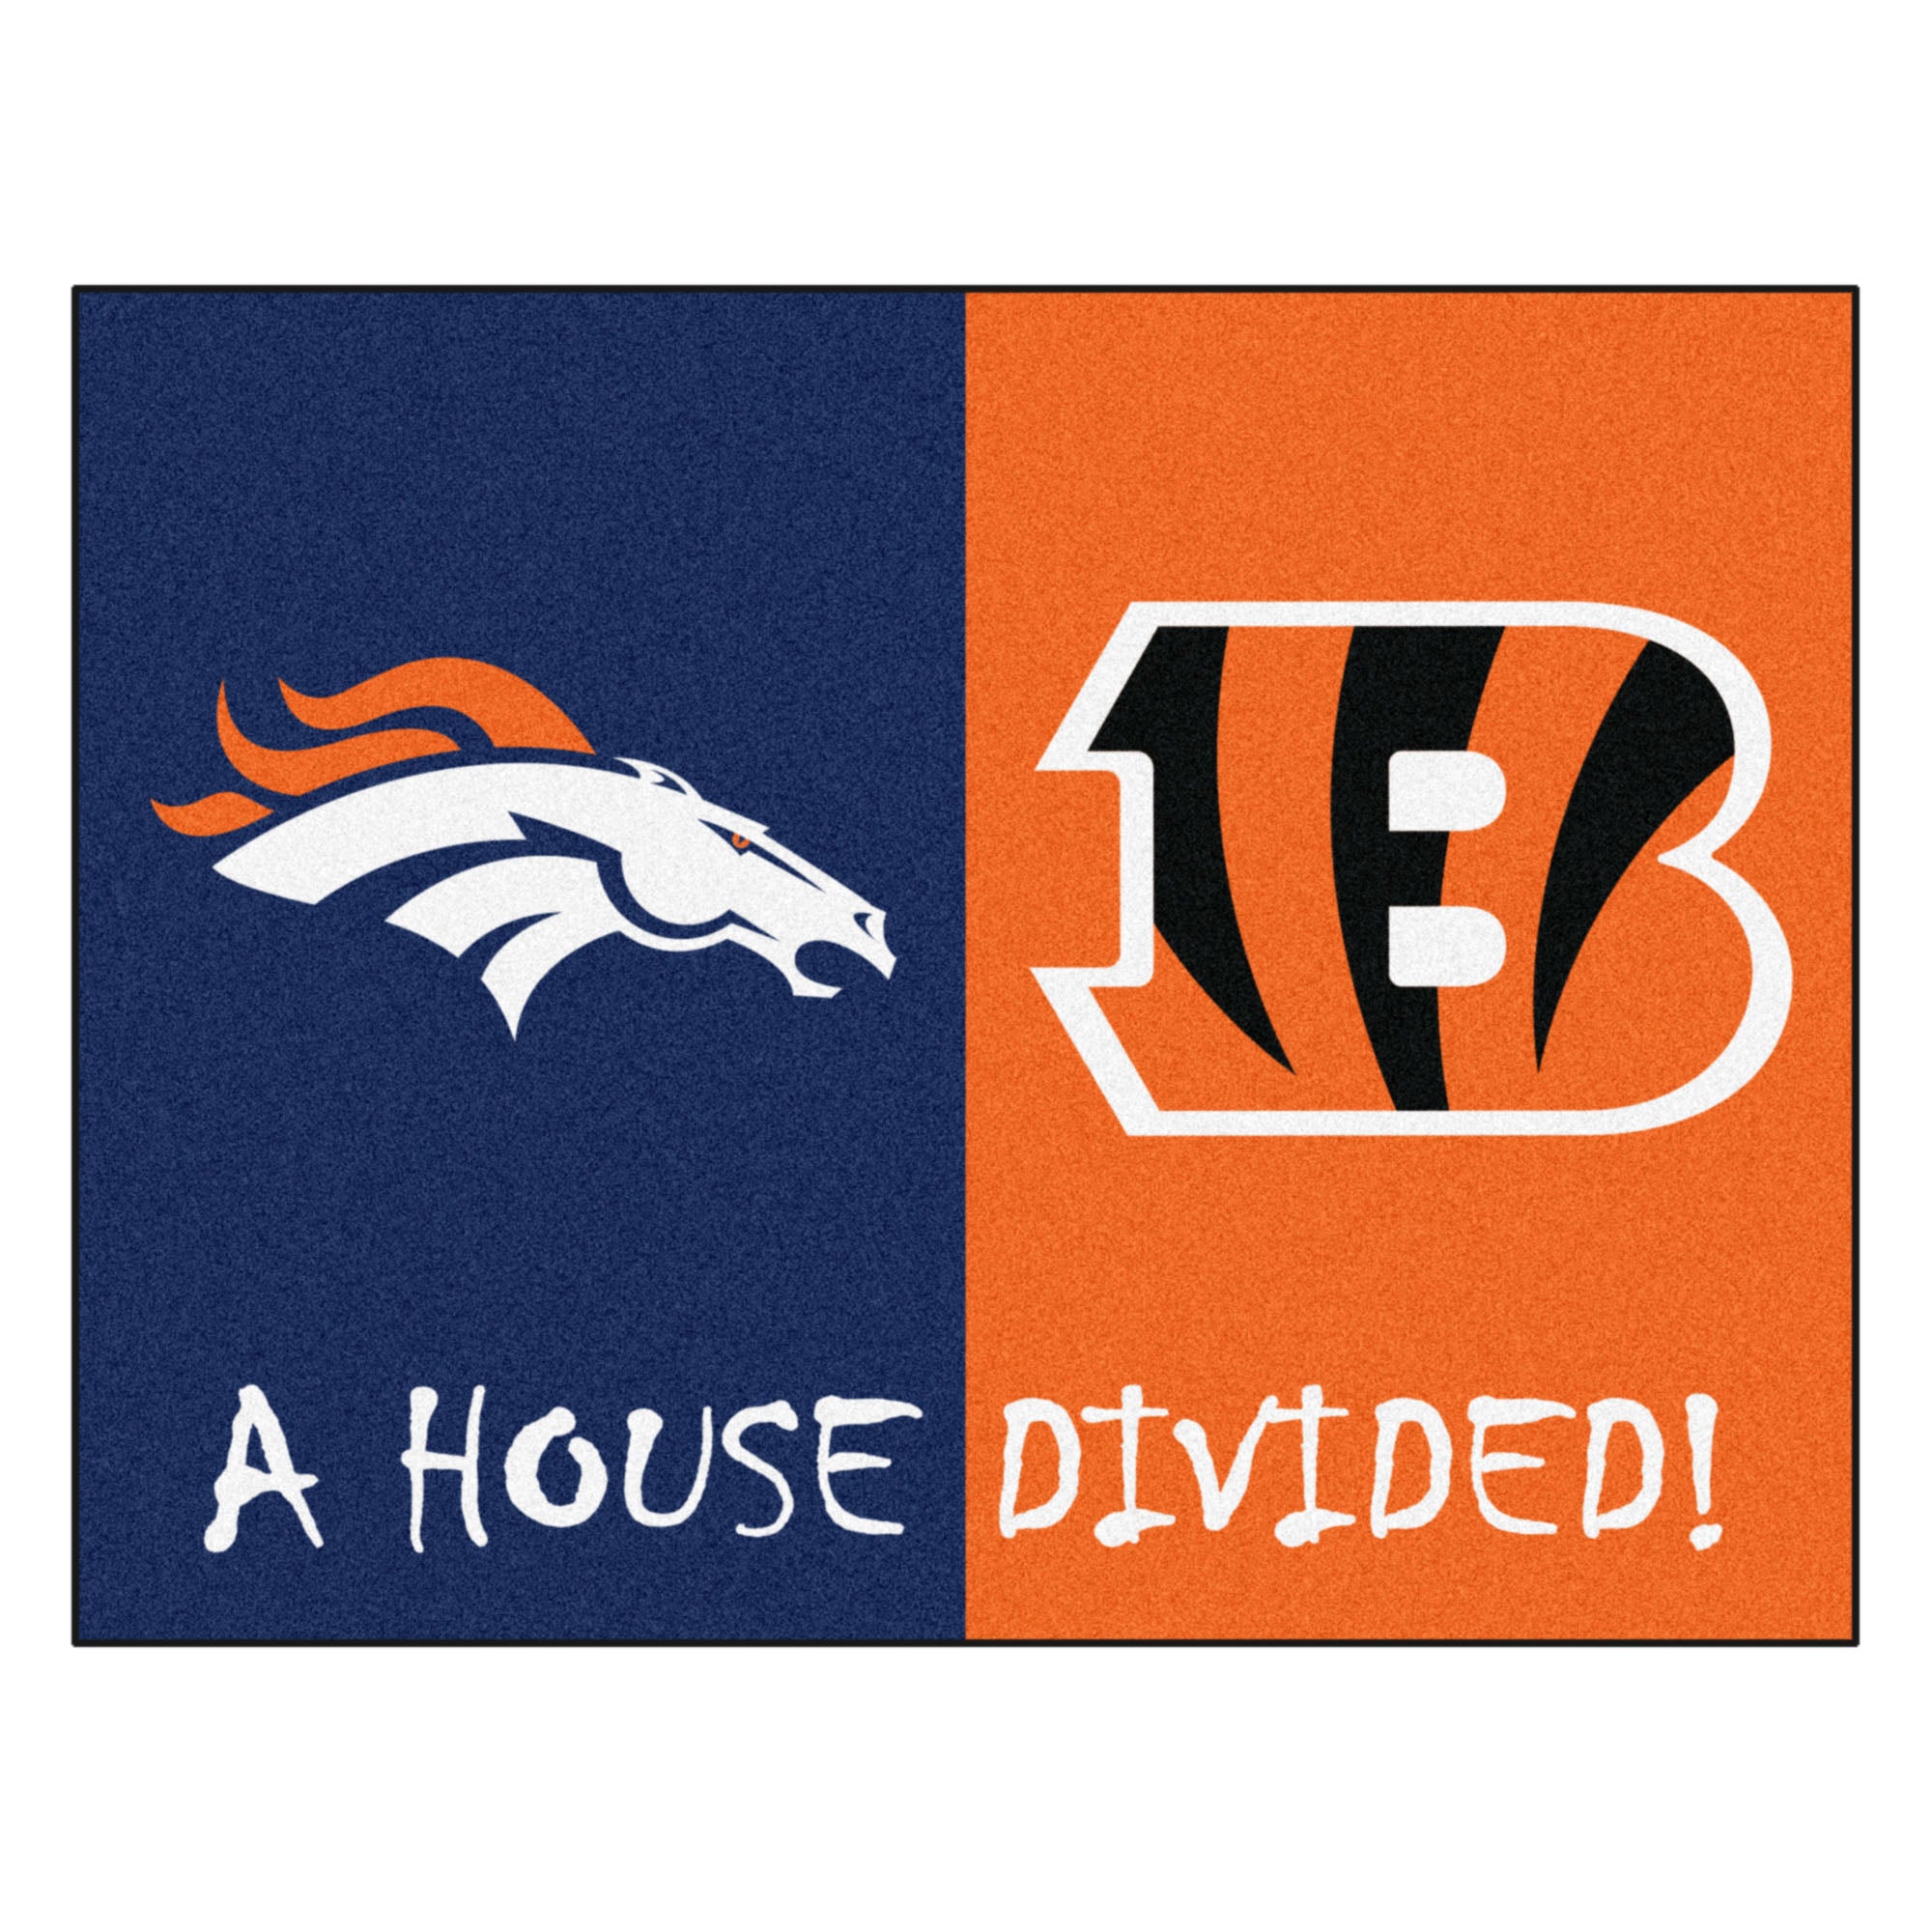 NFL House Divided - Broncos / Bengals House Divided Mat